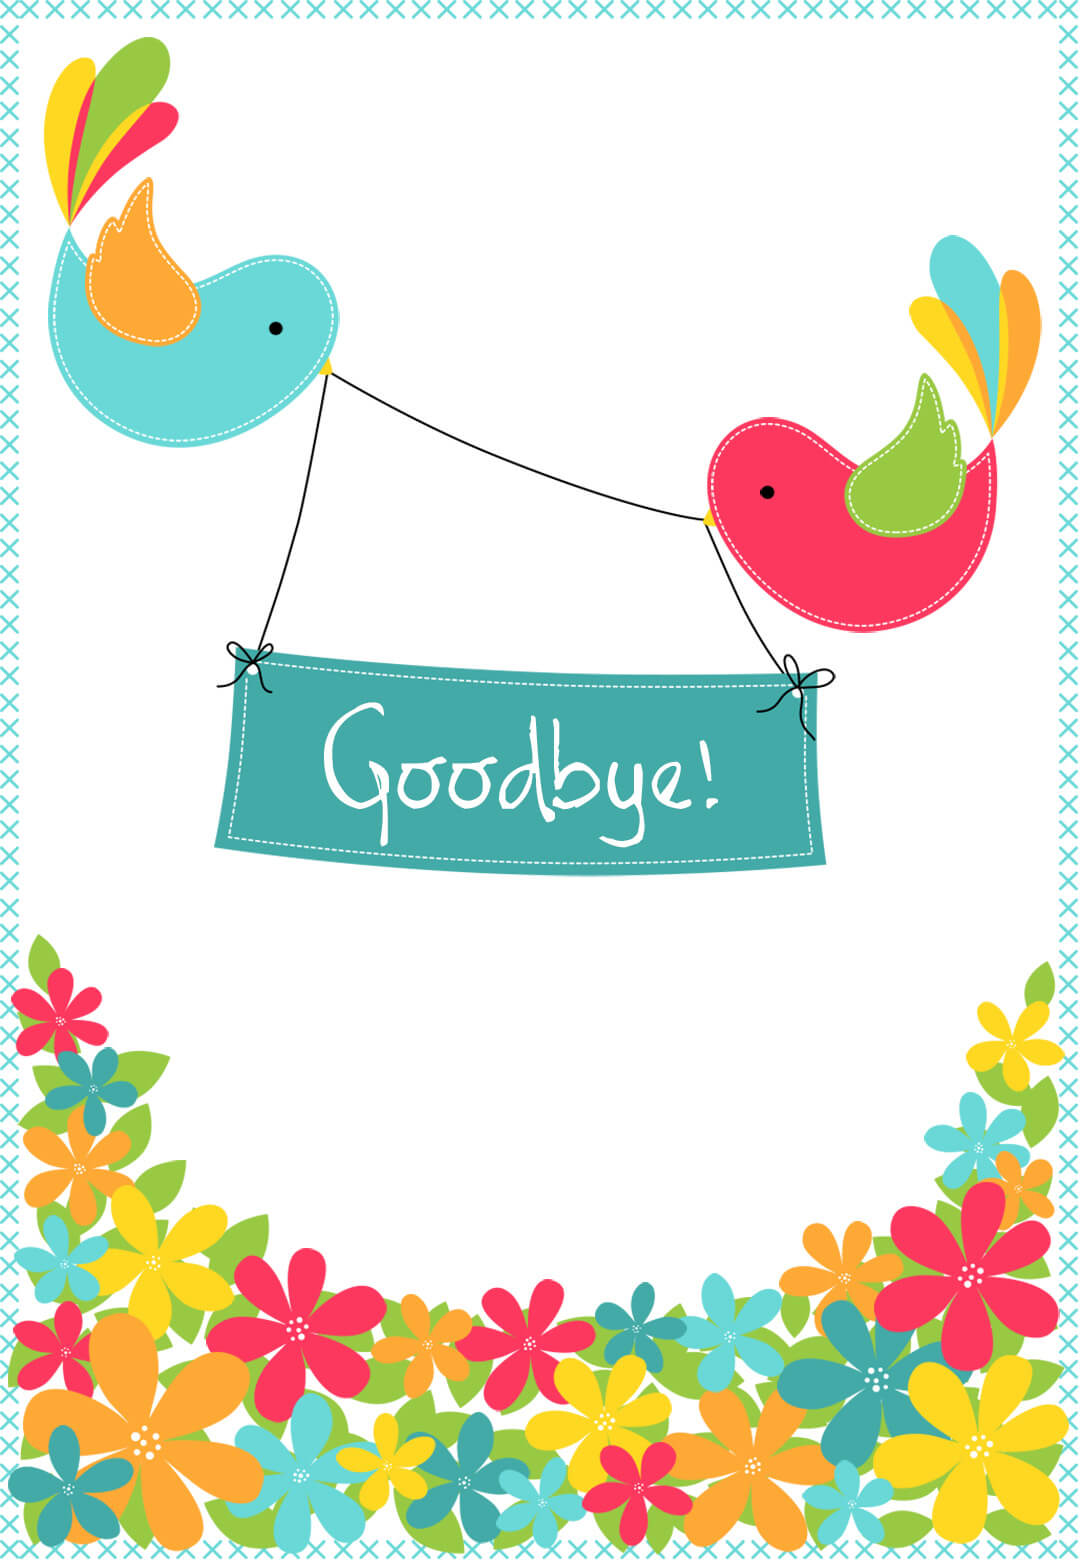 Goodbye From Your Colleagues – Good Luck Card (Free Within Good Luck Card Template